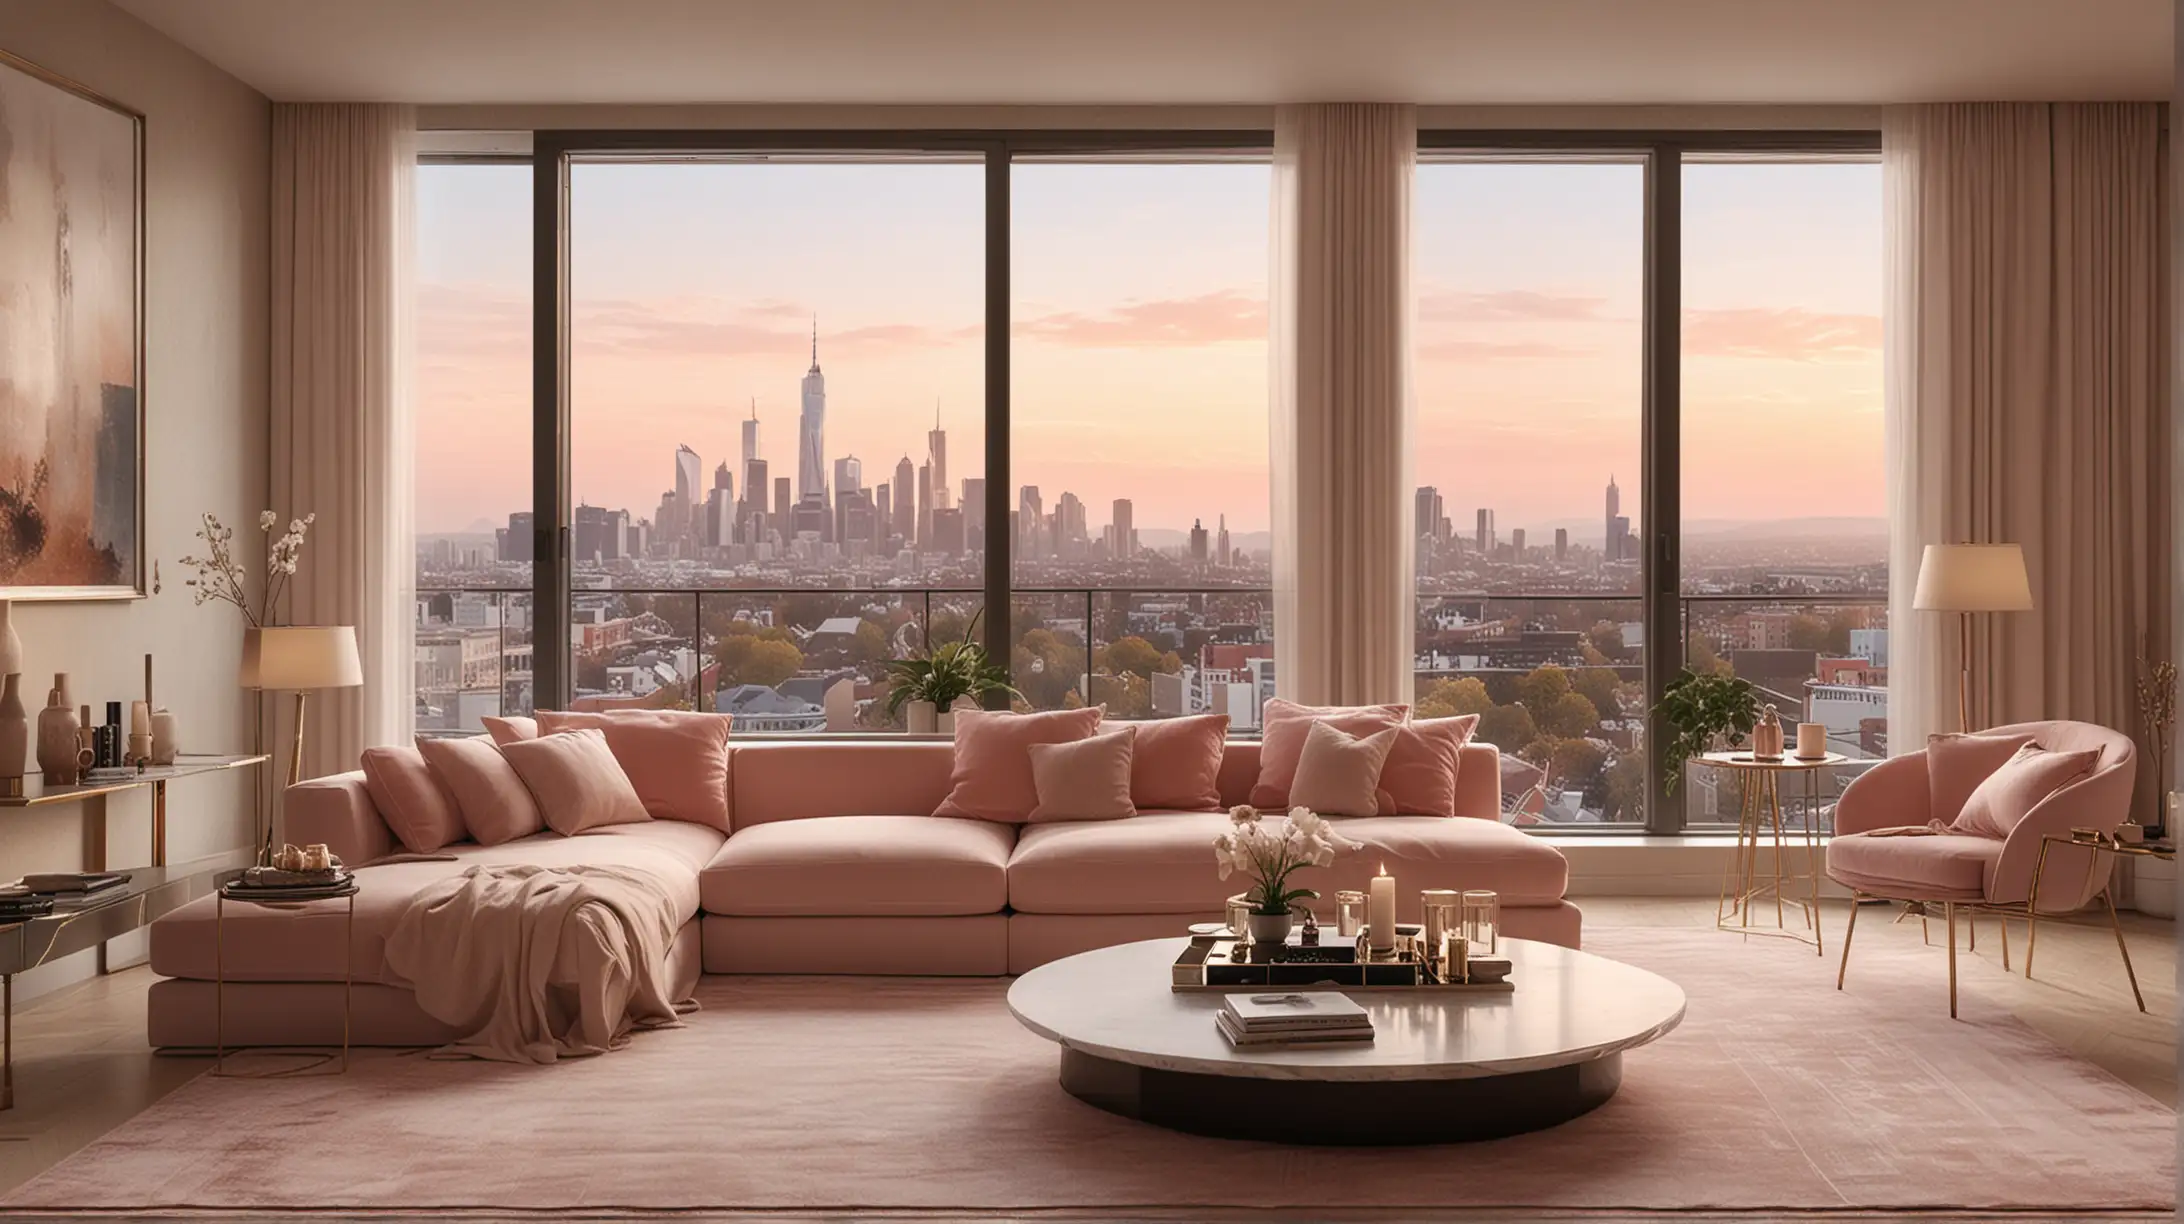 Create a captivating scene of a modern luxury apartment bathed in the soft, warm light of sunrise. The interior features a sophisticated palette dominated by blush pink tones, with floor-to-ceiling windows that offer breathtaking views of the city skyline. In the living area, a stylish coffee table takes center stage, adorned with a flickering candle that adds a touch of warmth and elegance. Highlight the plush furnishings, sleek finishes, and tasteful decor, emphasizing the serene ambiance created by the interplay of natural light and the apartment's refined color scheme. Capture the essence of luxury and tranquility in this chic urban sanctuary.